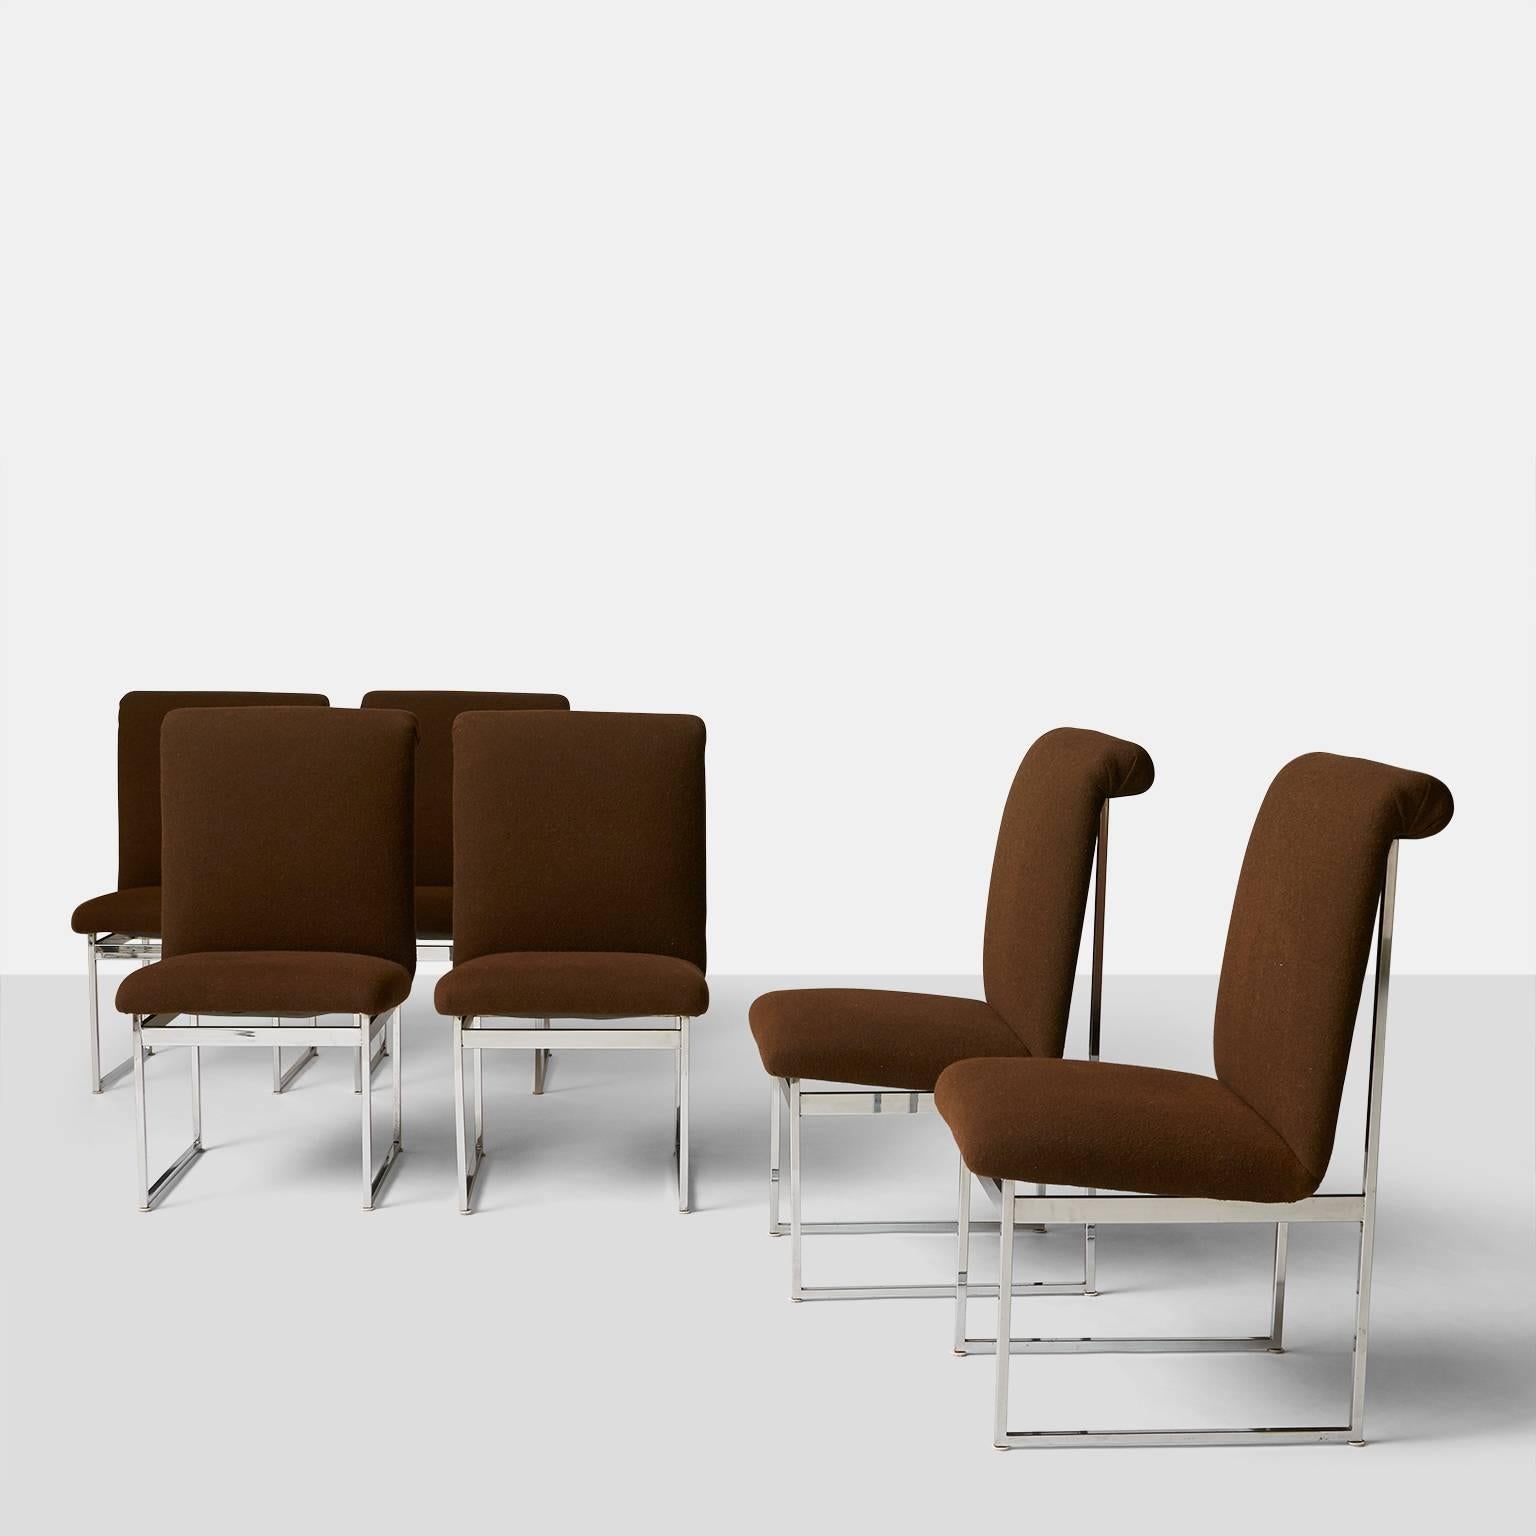 A set of six high back dining chairs in chromed steel and chocolate brown wool upholstery. The seat slants back slightly for extra comfort while the back has a rolled detail at the top. Made in the 1970s.